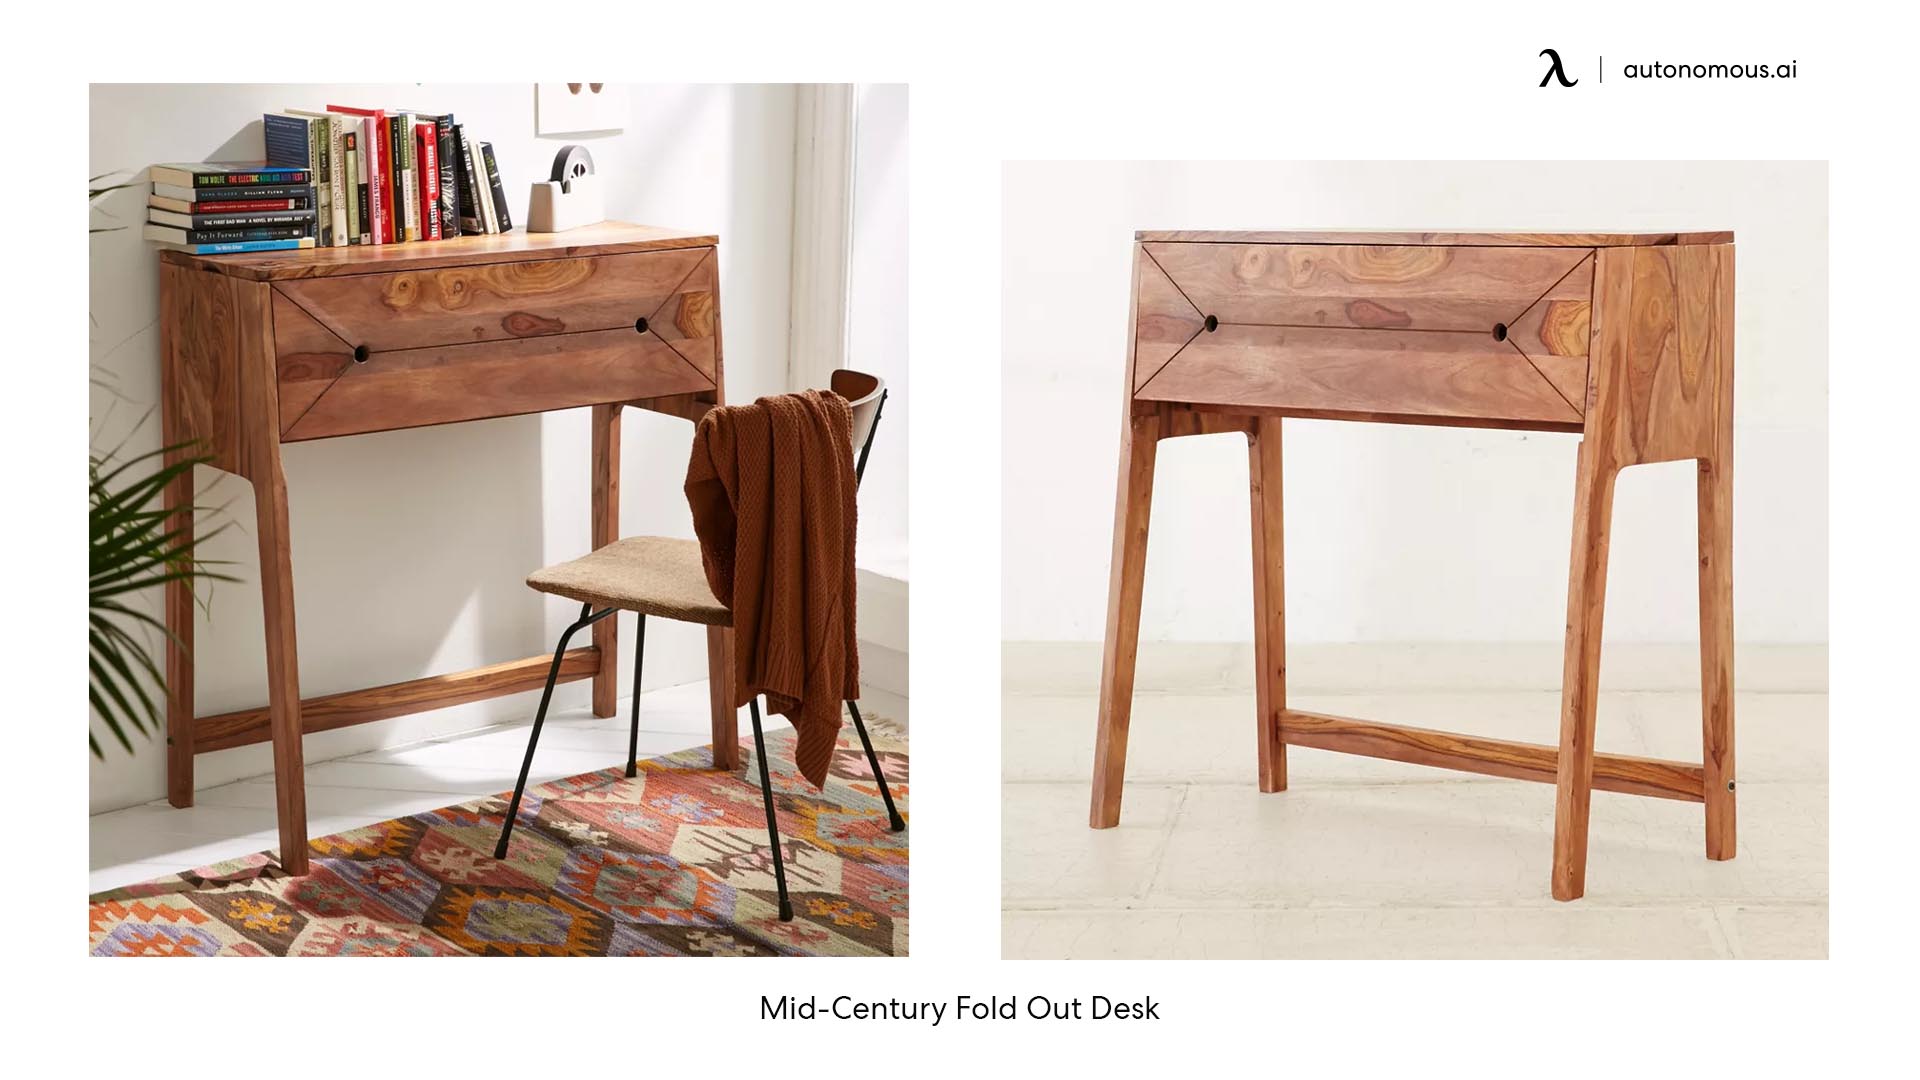 Mid-Century Fold Out desks for work from home